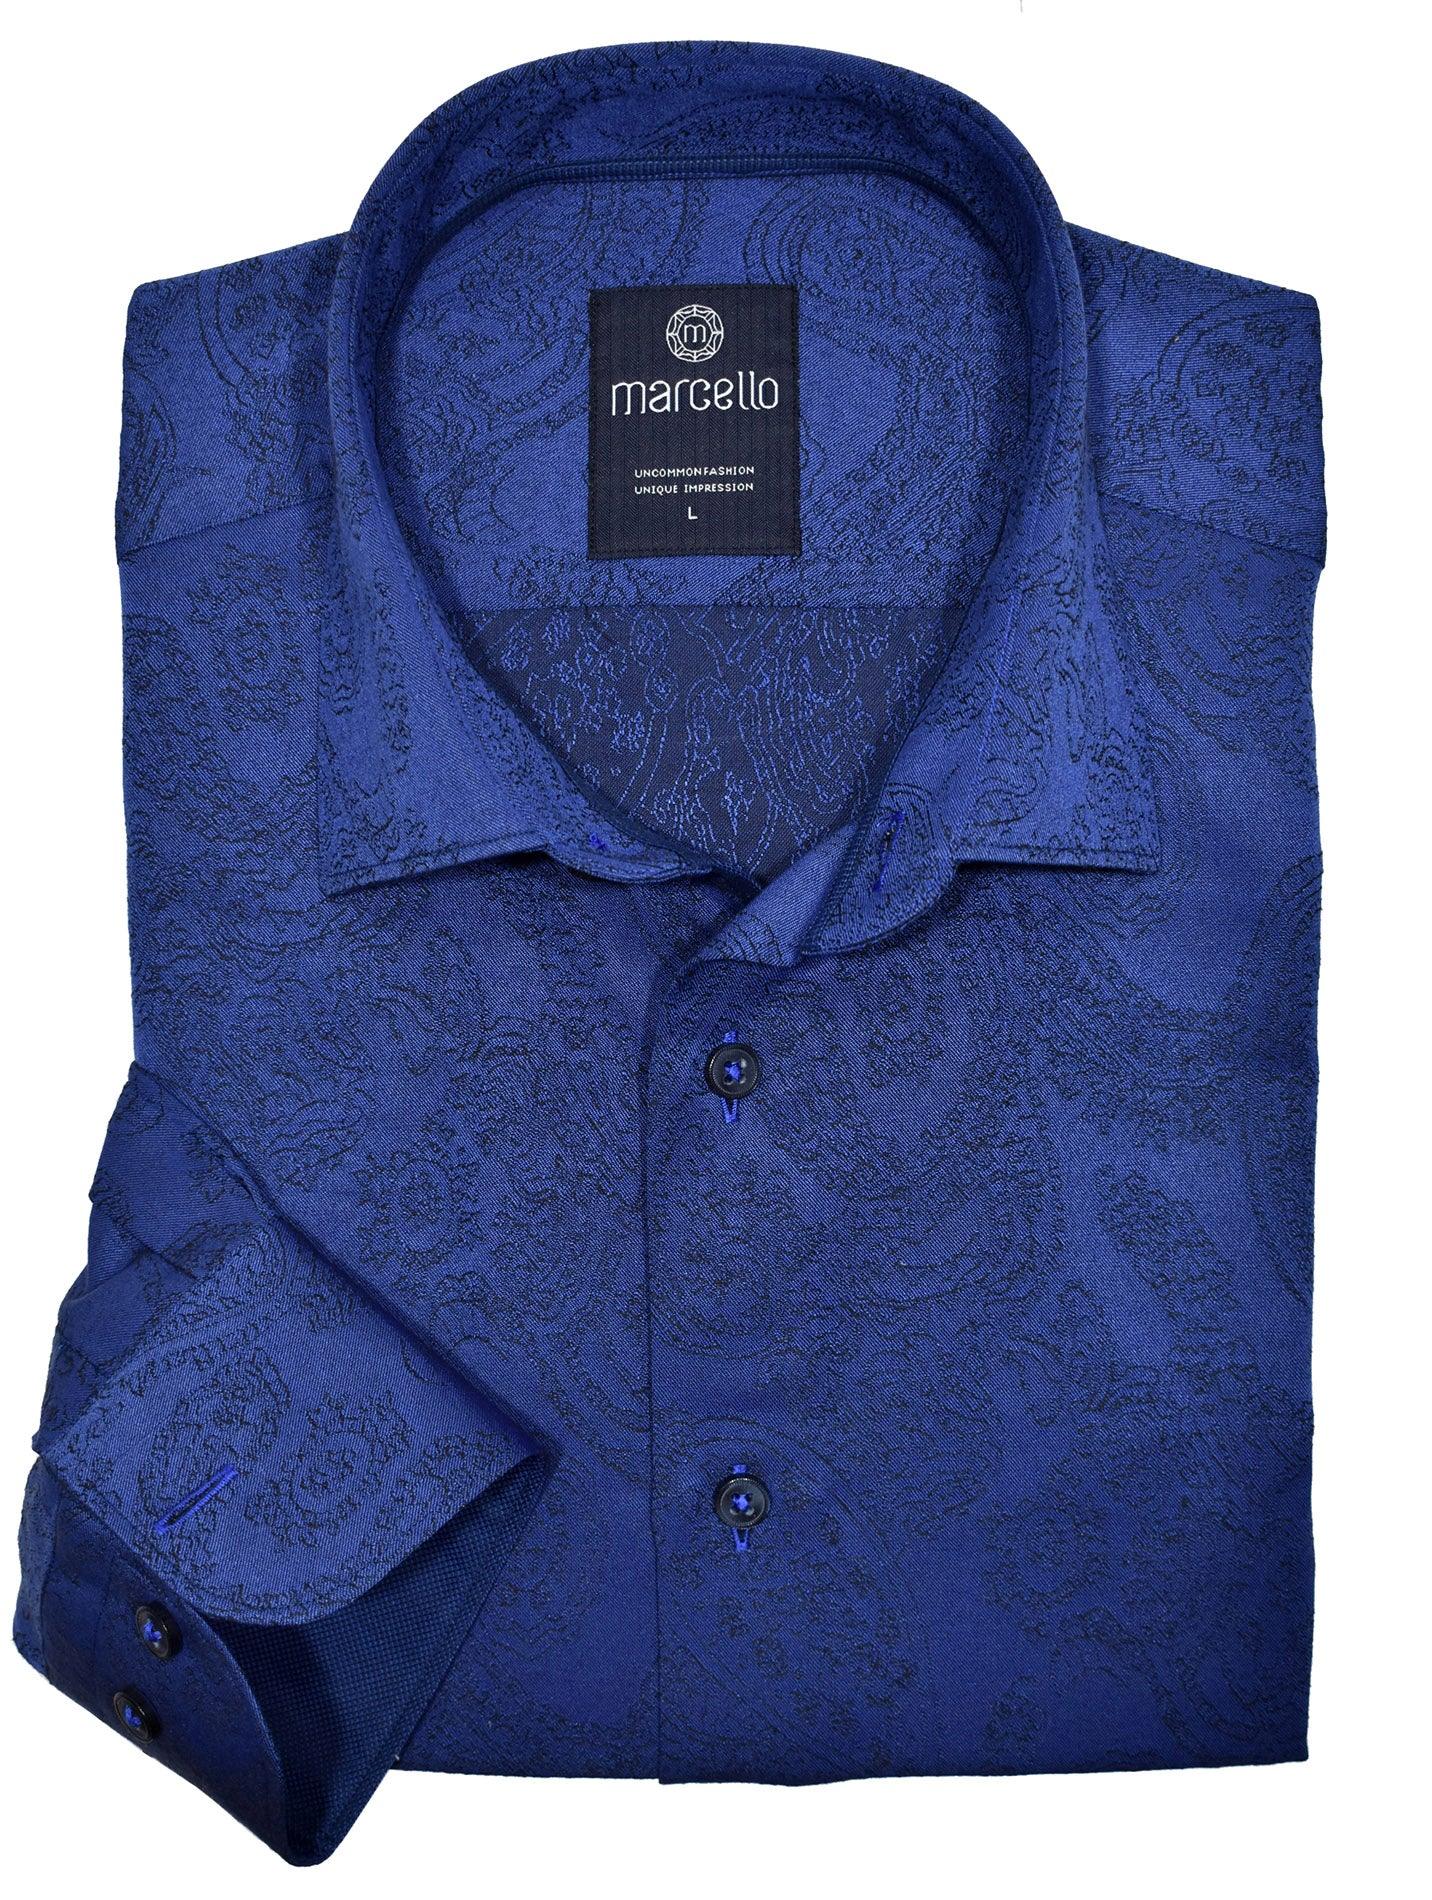 A cool navy shirt sporting a tone on tone paisley pattern will never go out of style and is a must have for any wardrobe.  Cotton fabric. Tonal paisley pattern updates the image. Blue piping details and cuff trim fabric. Contrast stitching and unique buttons. Medium collar. Classic shaped fit.